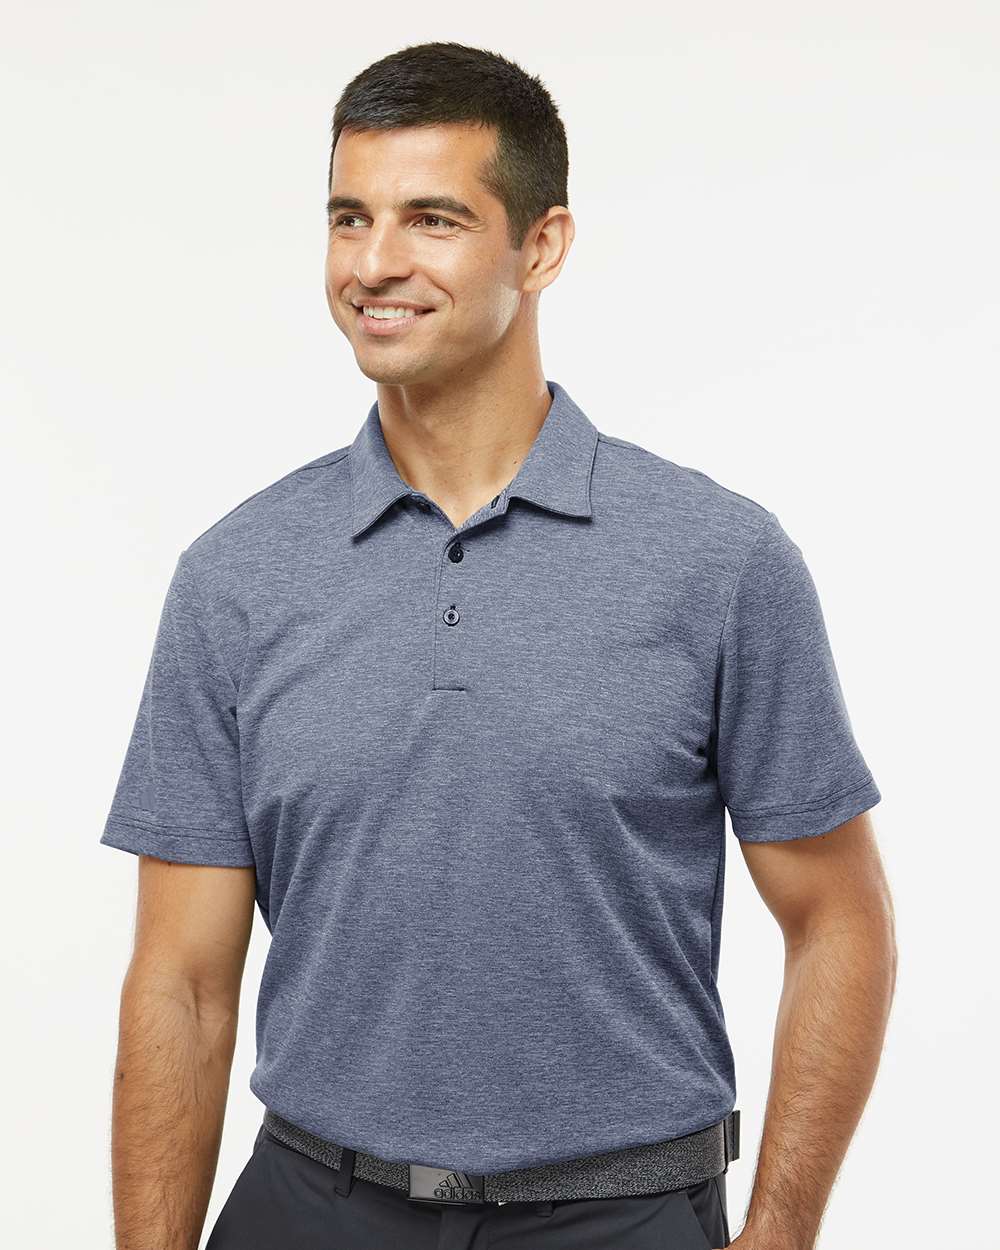 Adidas A582 Heathered Polo Shirt #colormdl_Collegiate Navy Melange